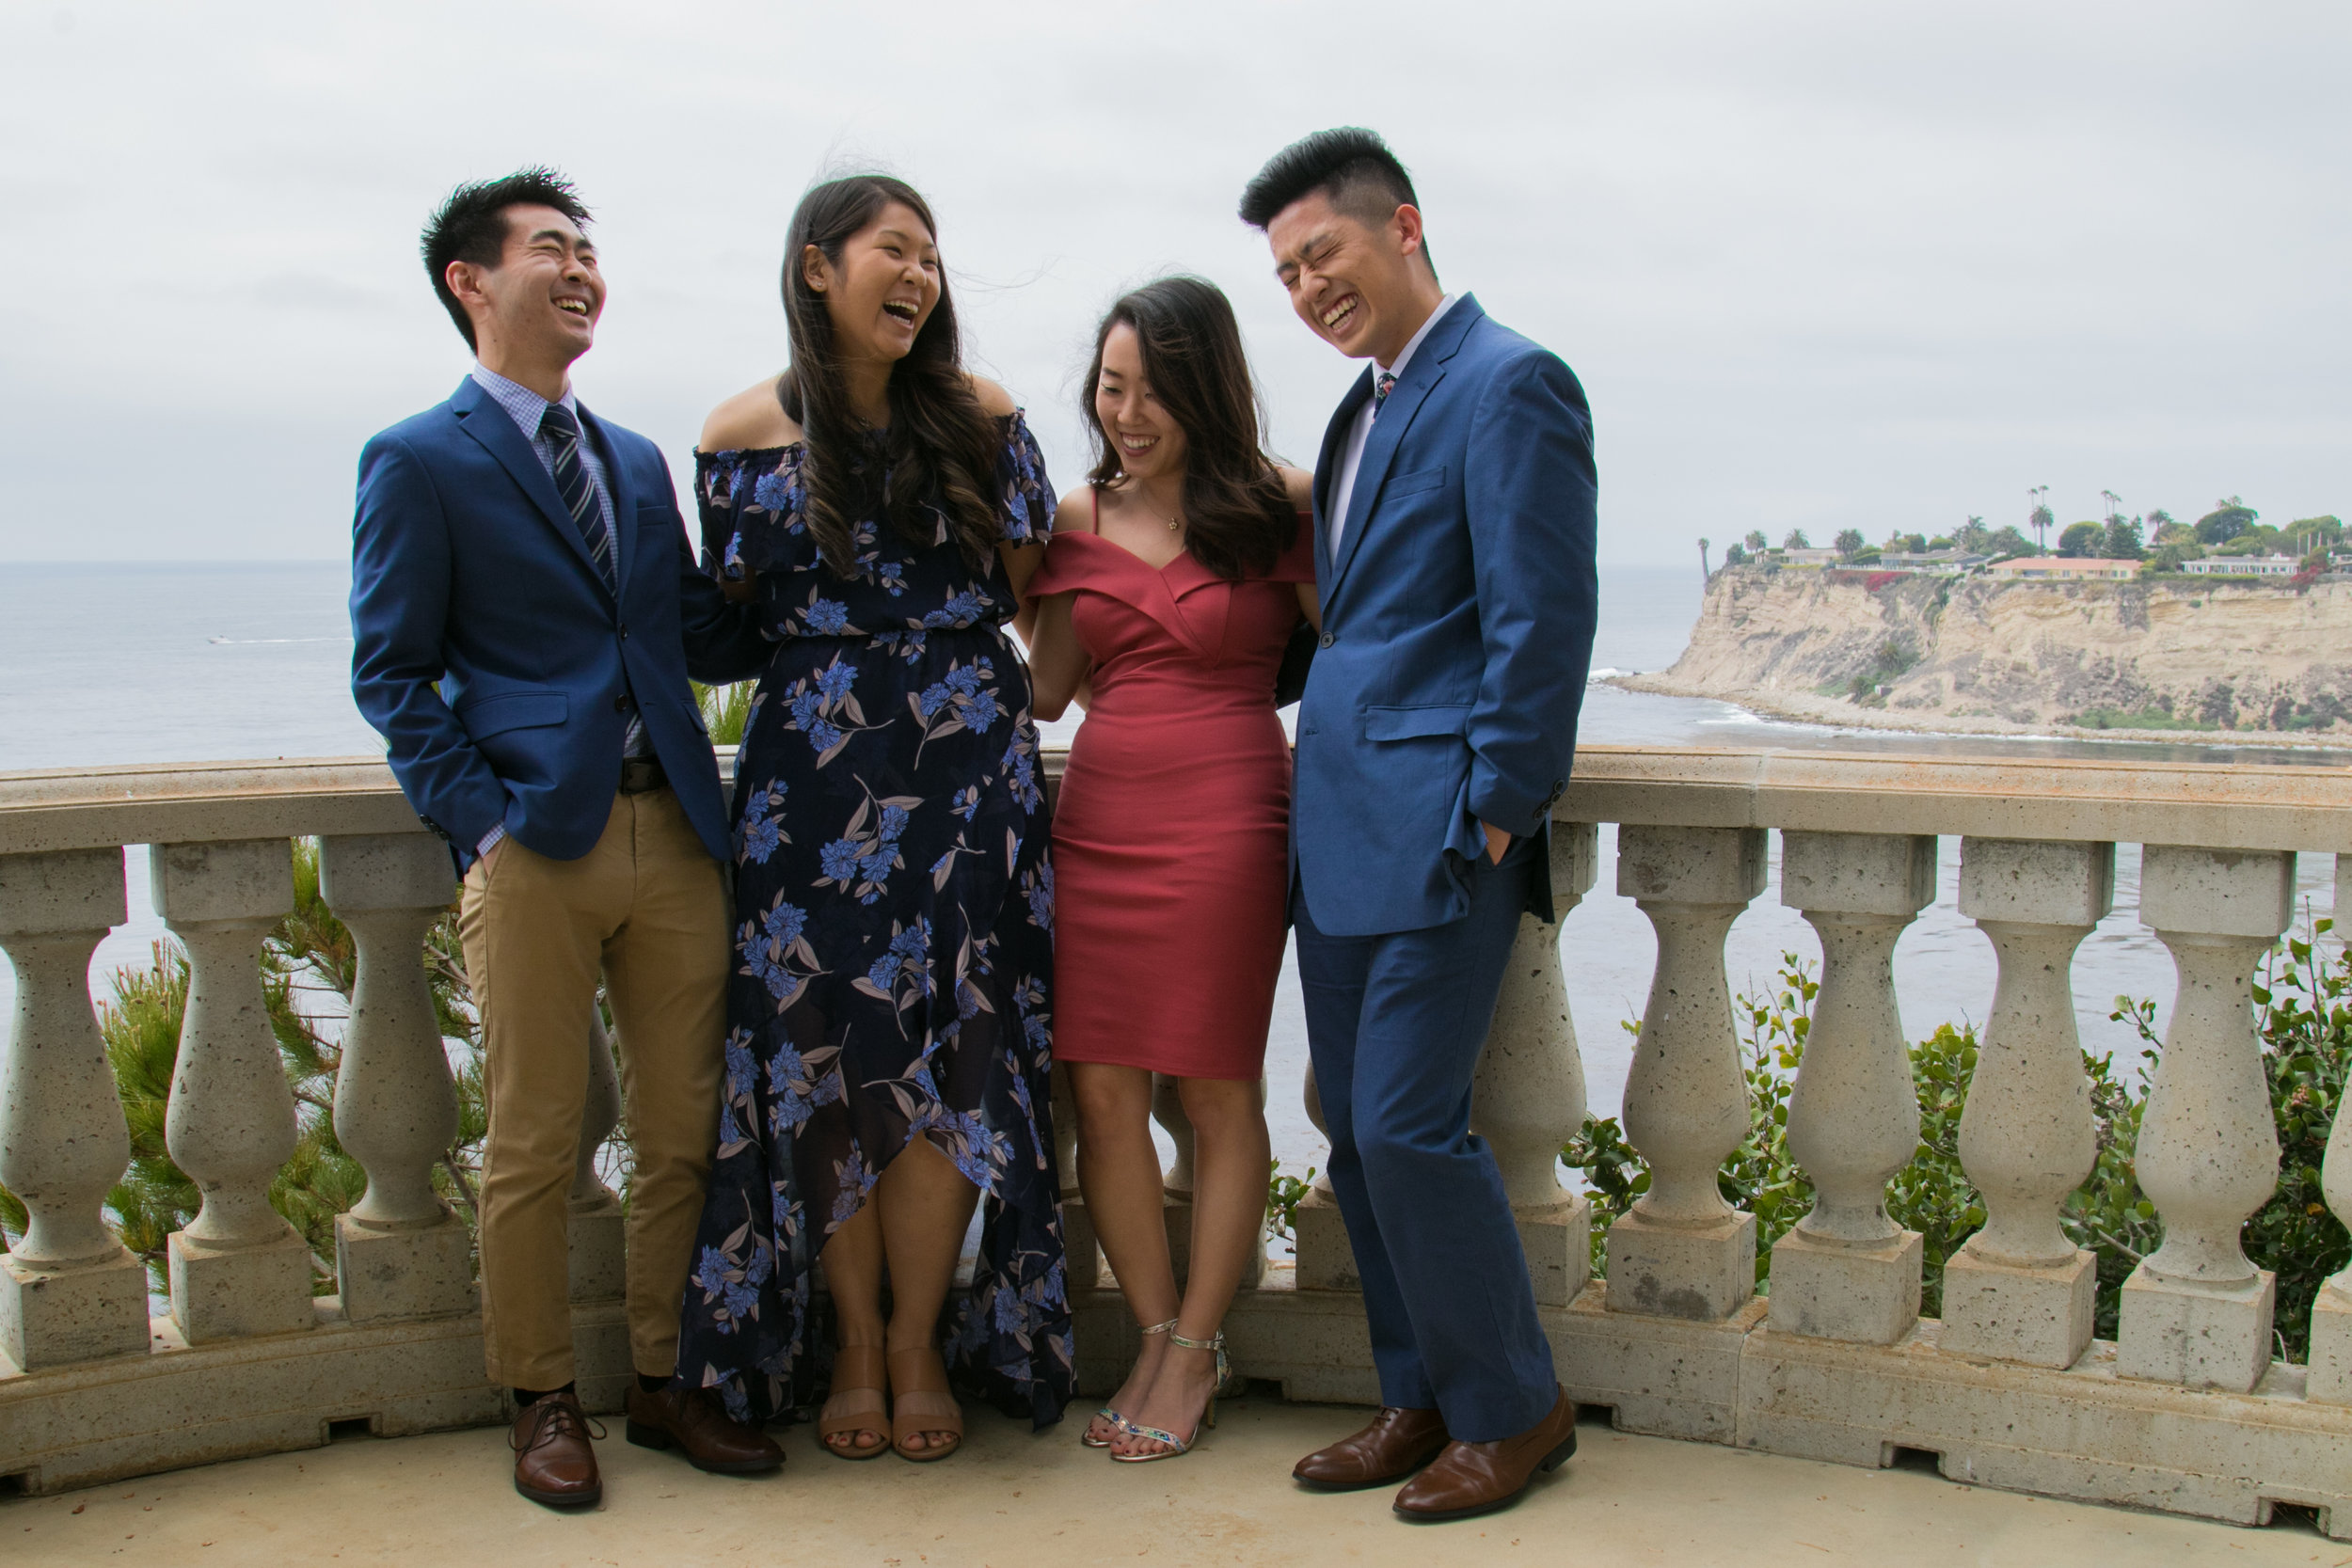 Two men and two women wearing suits and formal dresses laugh outside on a terrace overlooking water behind them.